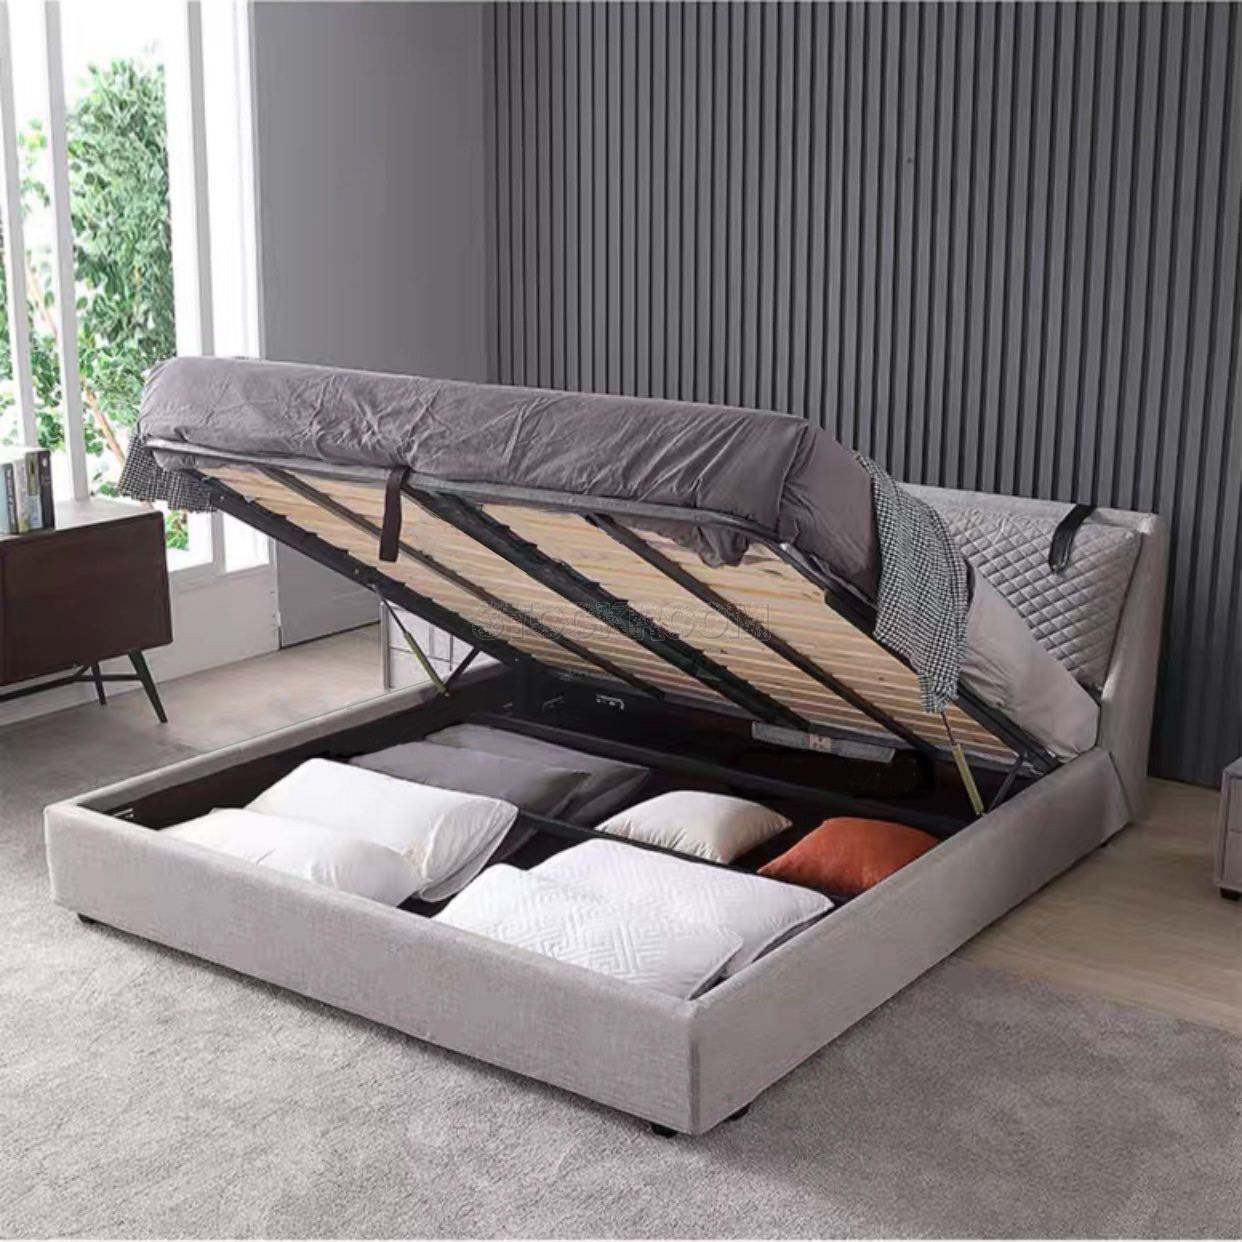 Camillo Fabric Upholstered Bed Frame With Storage